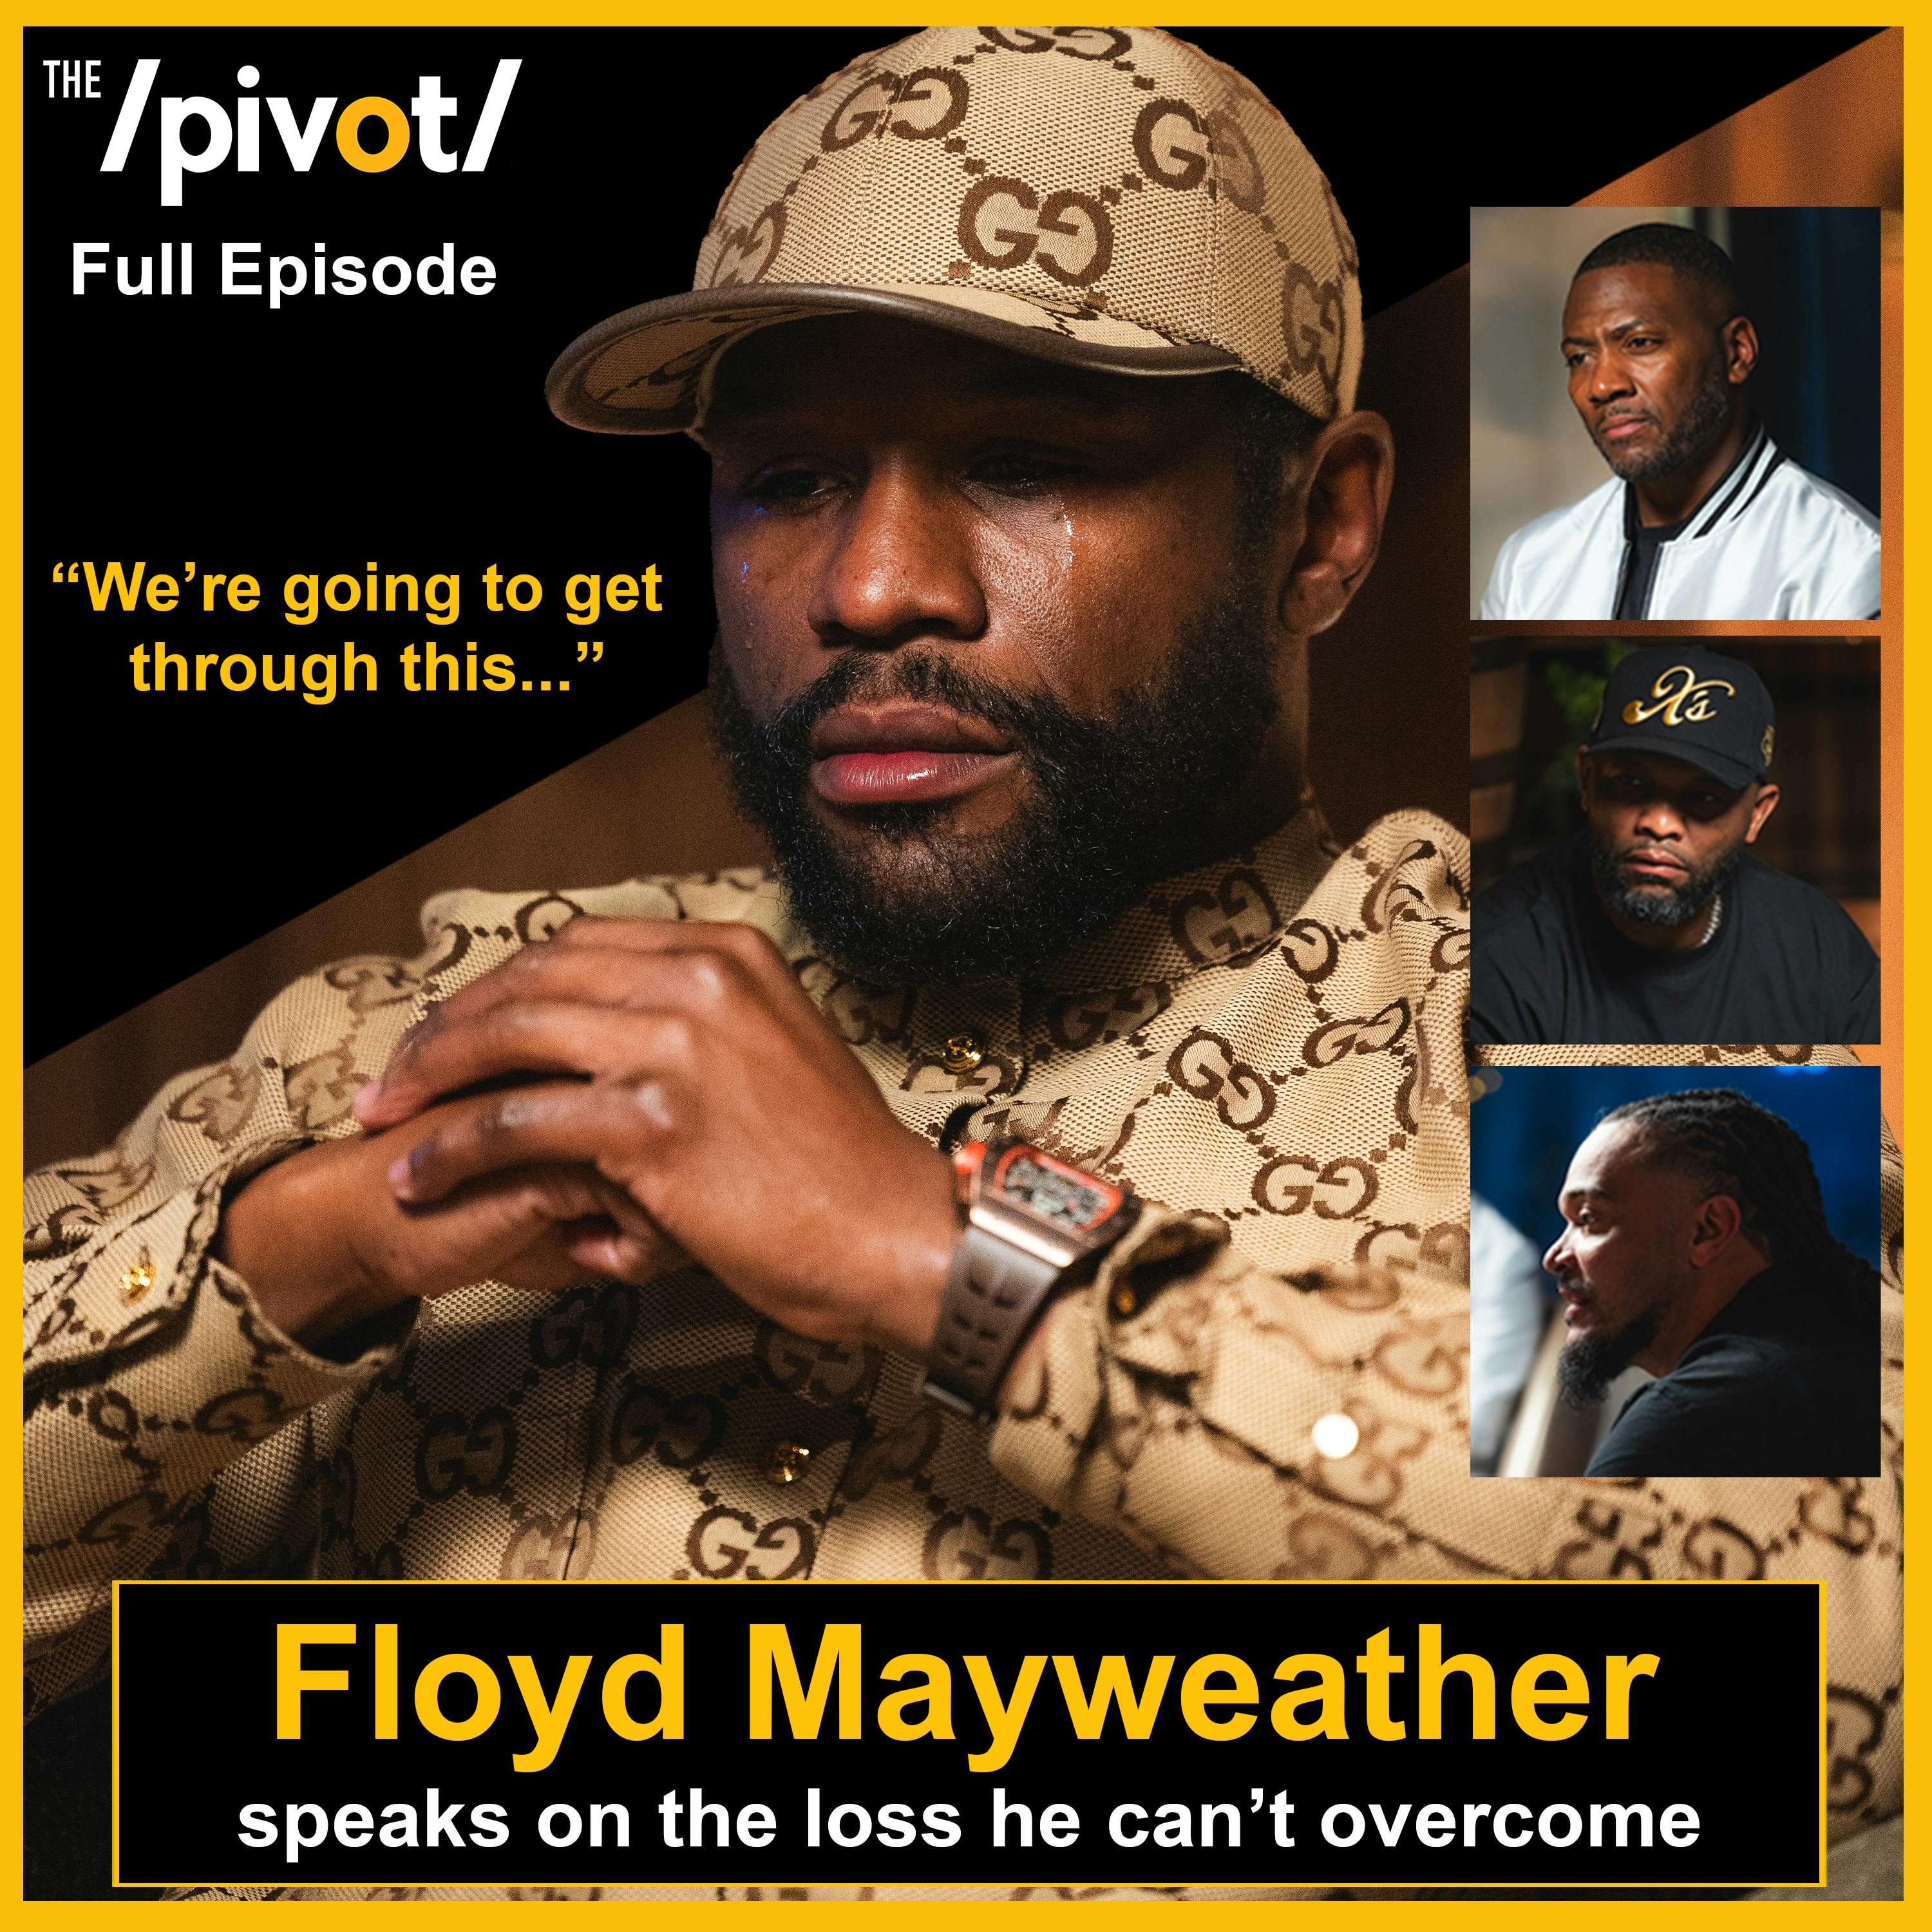 Floyd Mayweather the undefeated boxing champion talks about a loss he hasn't recovered from, importance of family, relationship with NBA Young Boy, Vegas being a sports mecca, and weighing in on the t